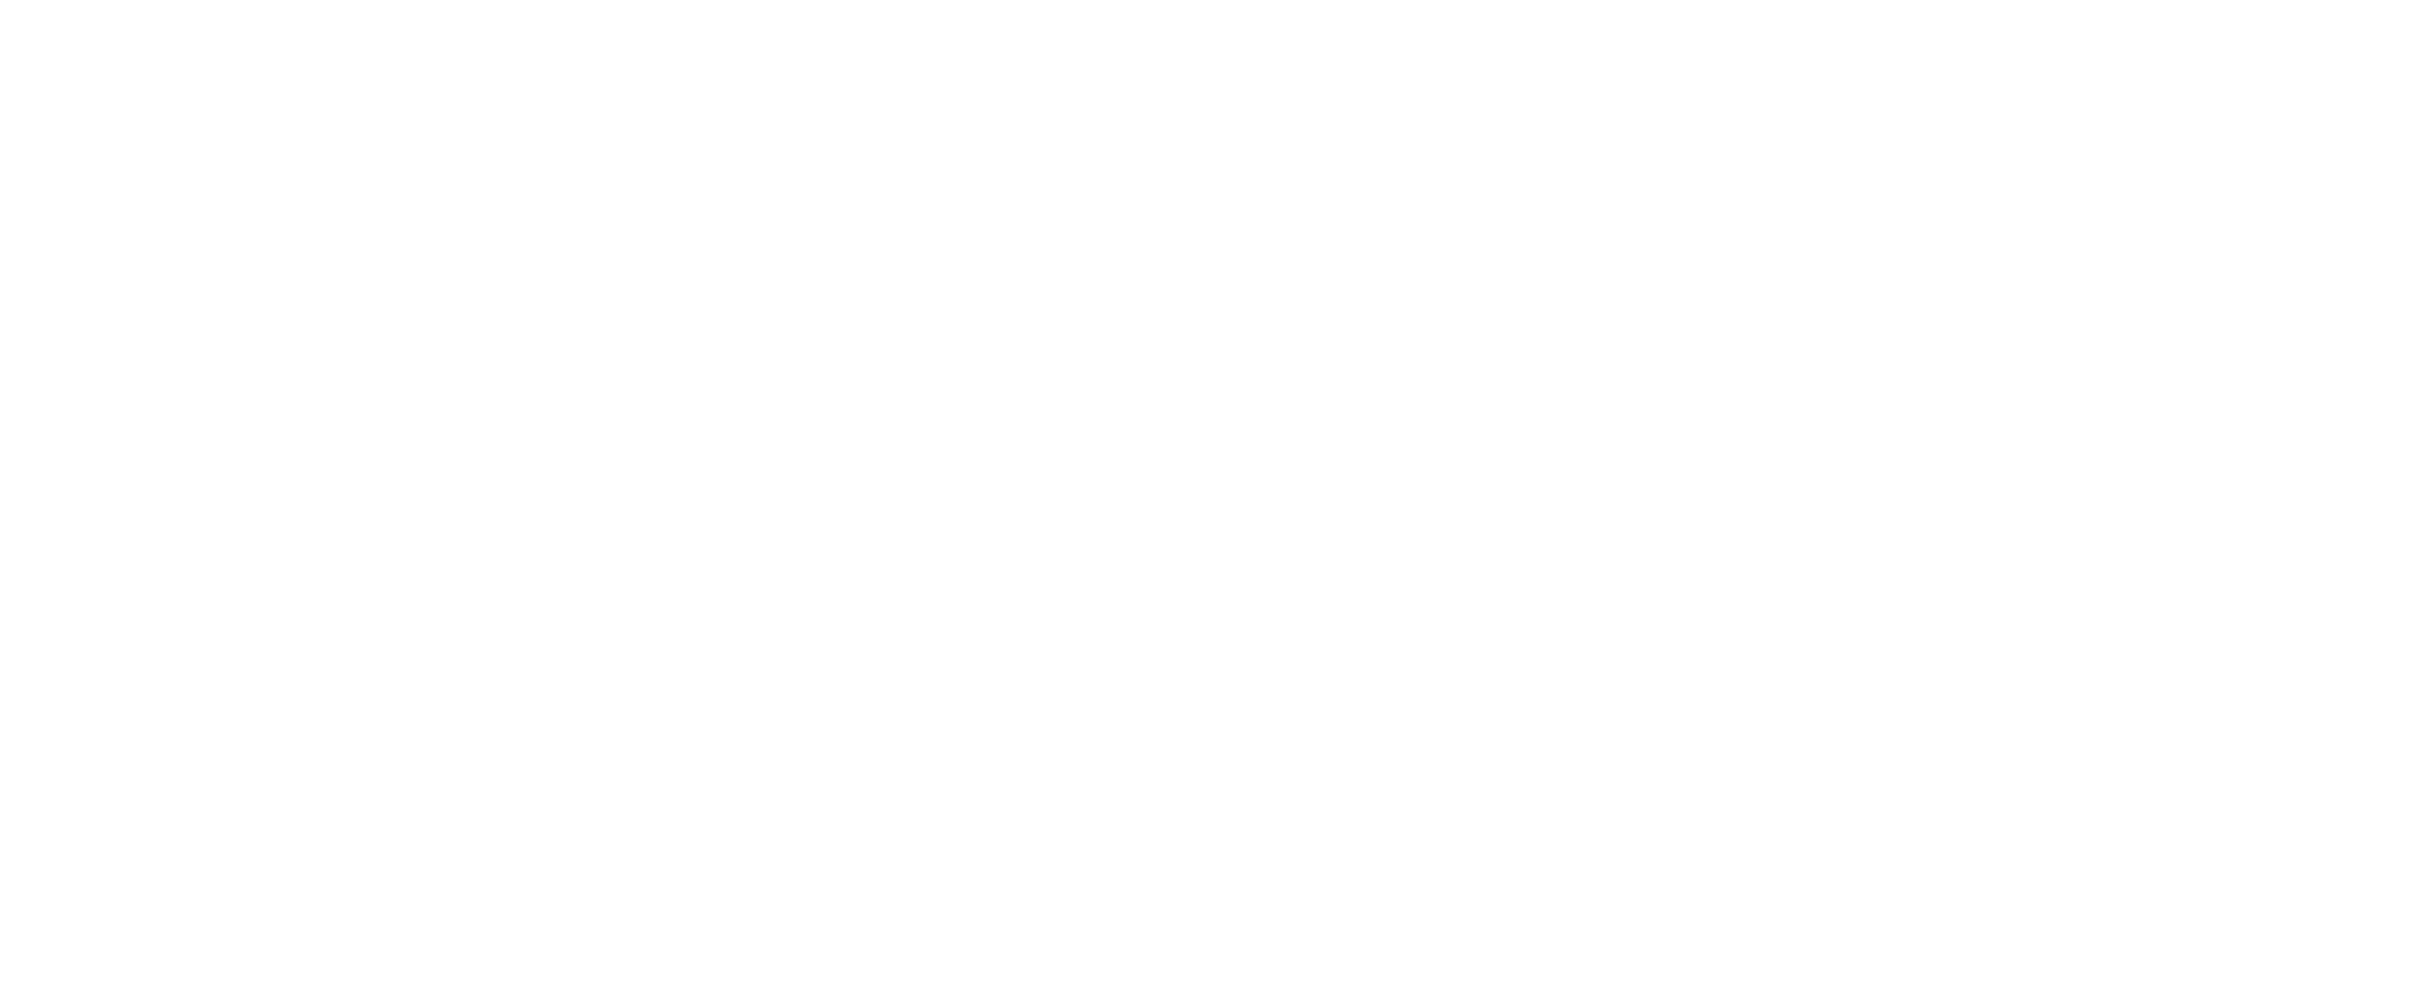 Back Galley Cafe and Catering